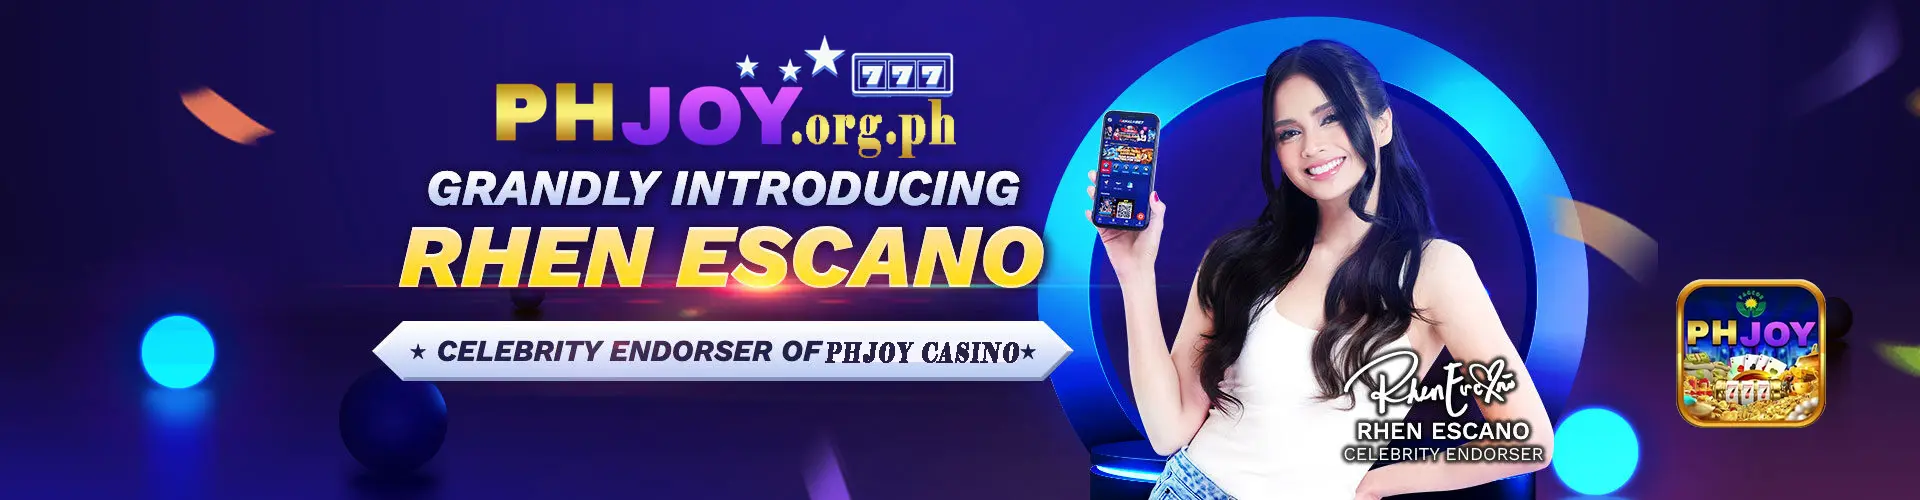 PHJOY-Promotions